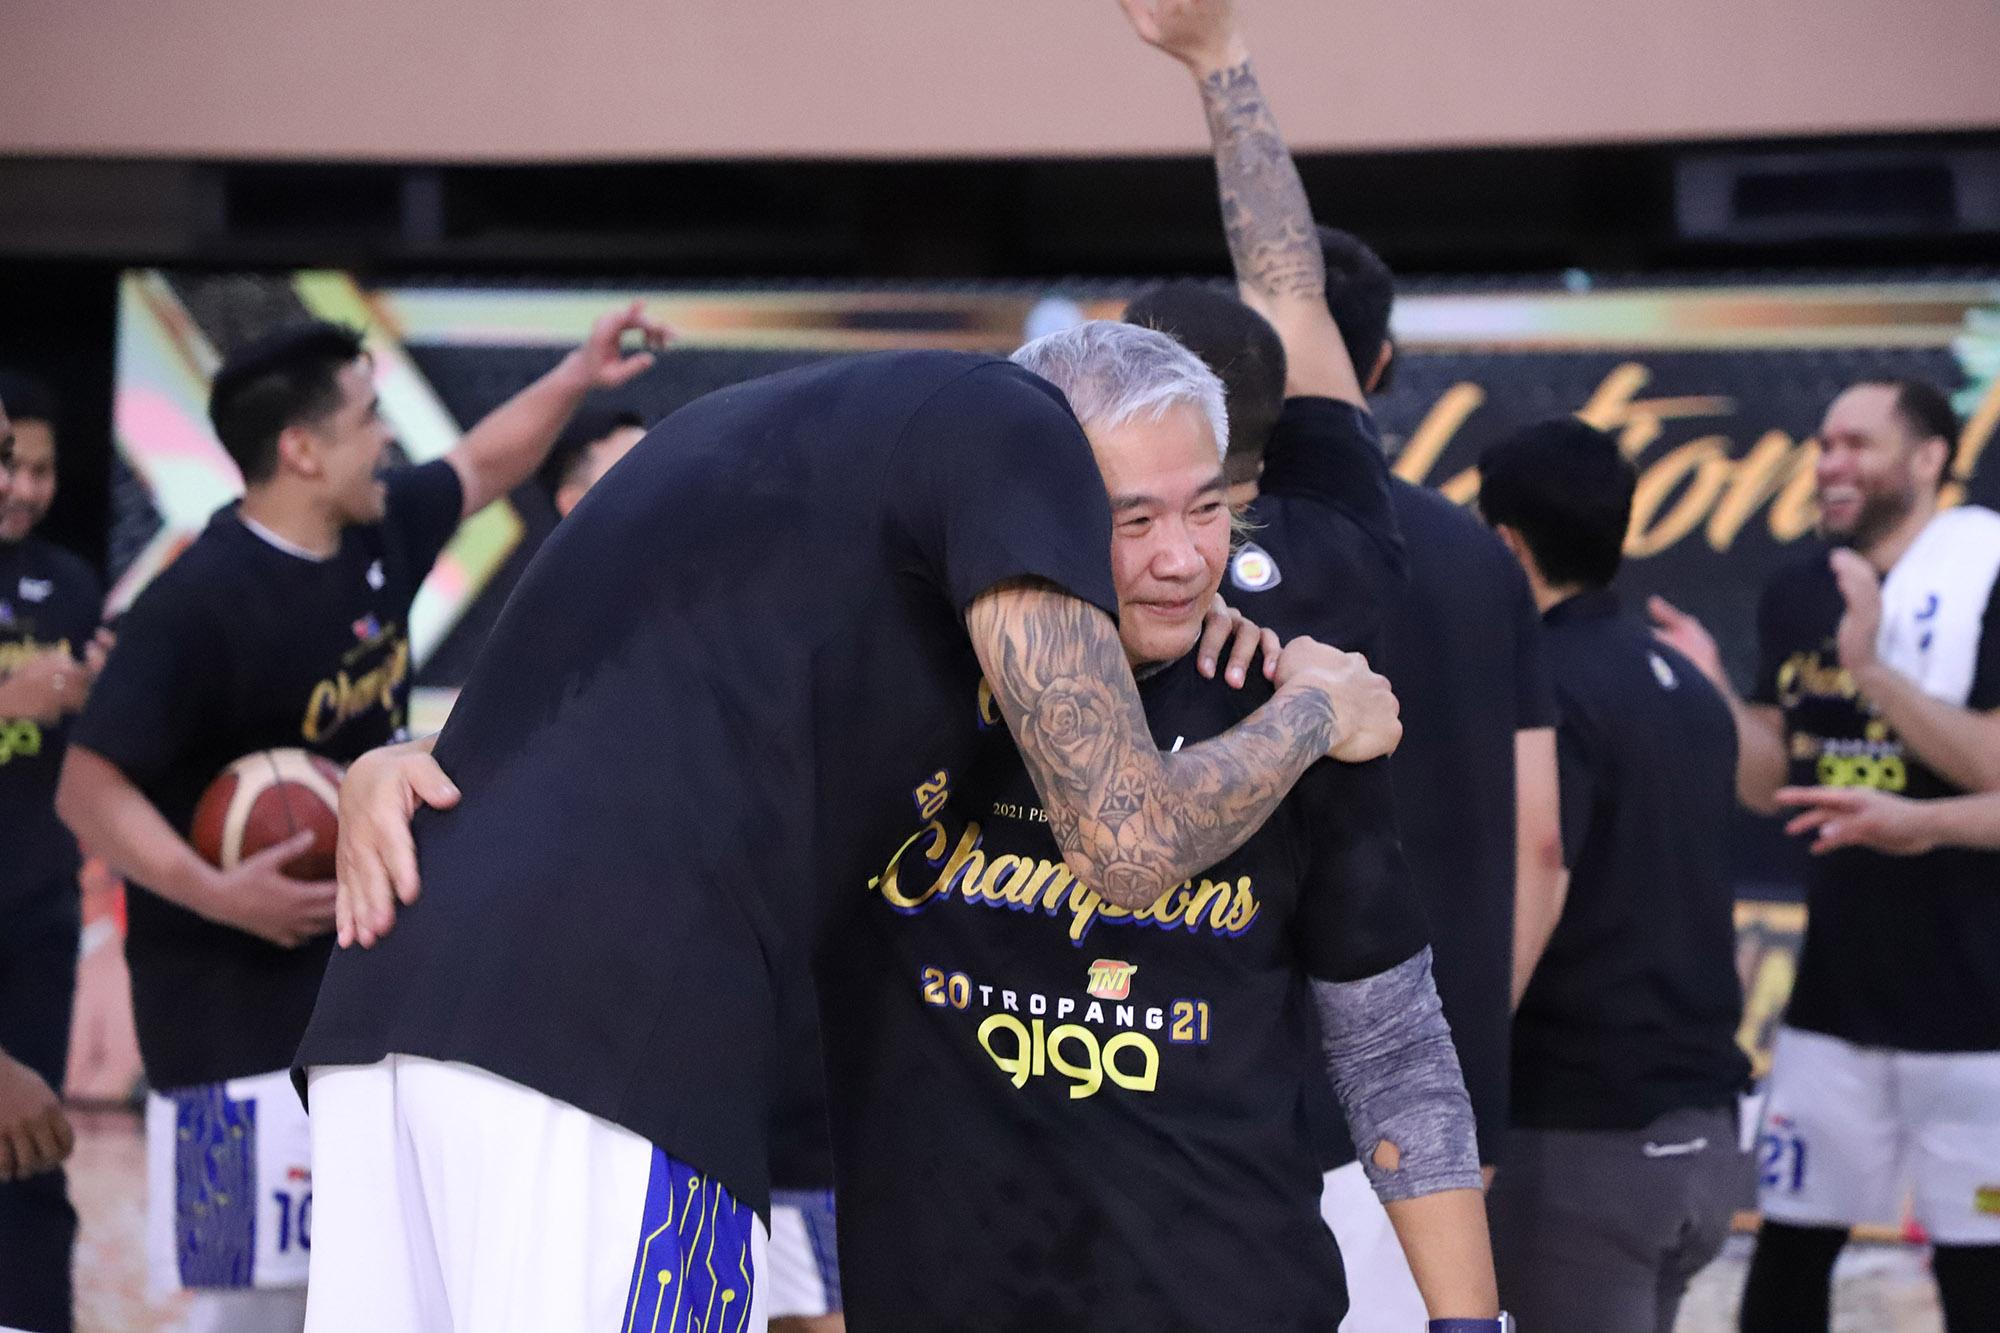 TNT closes out Magnolia to win PBA Philippine Cup title again after 8 years